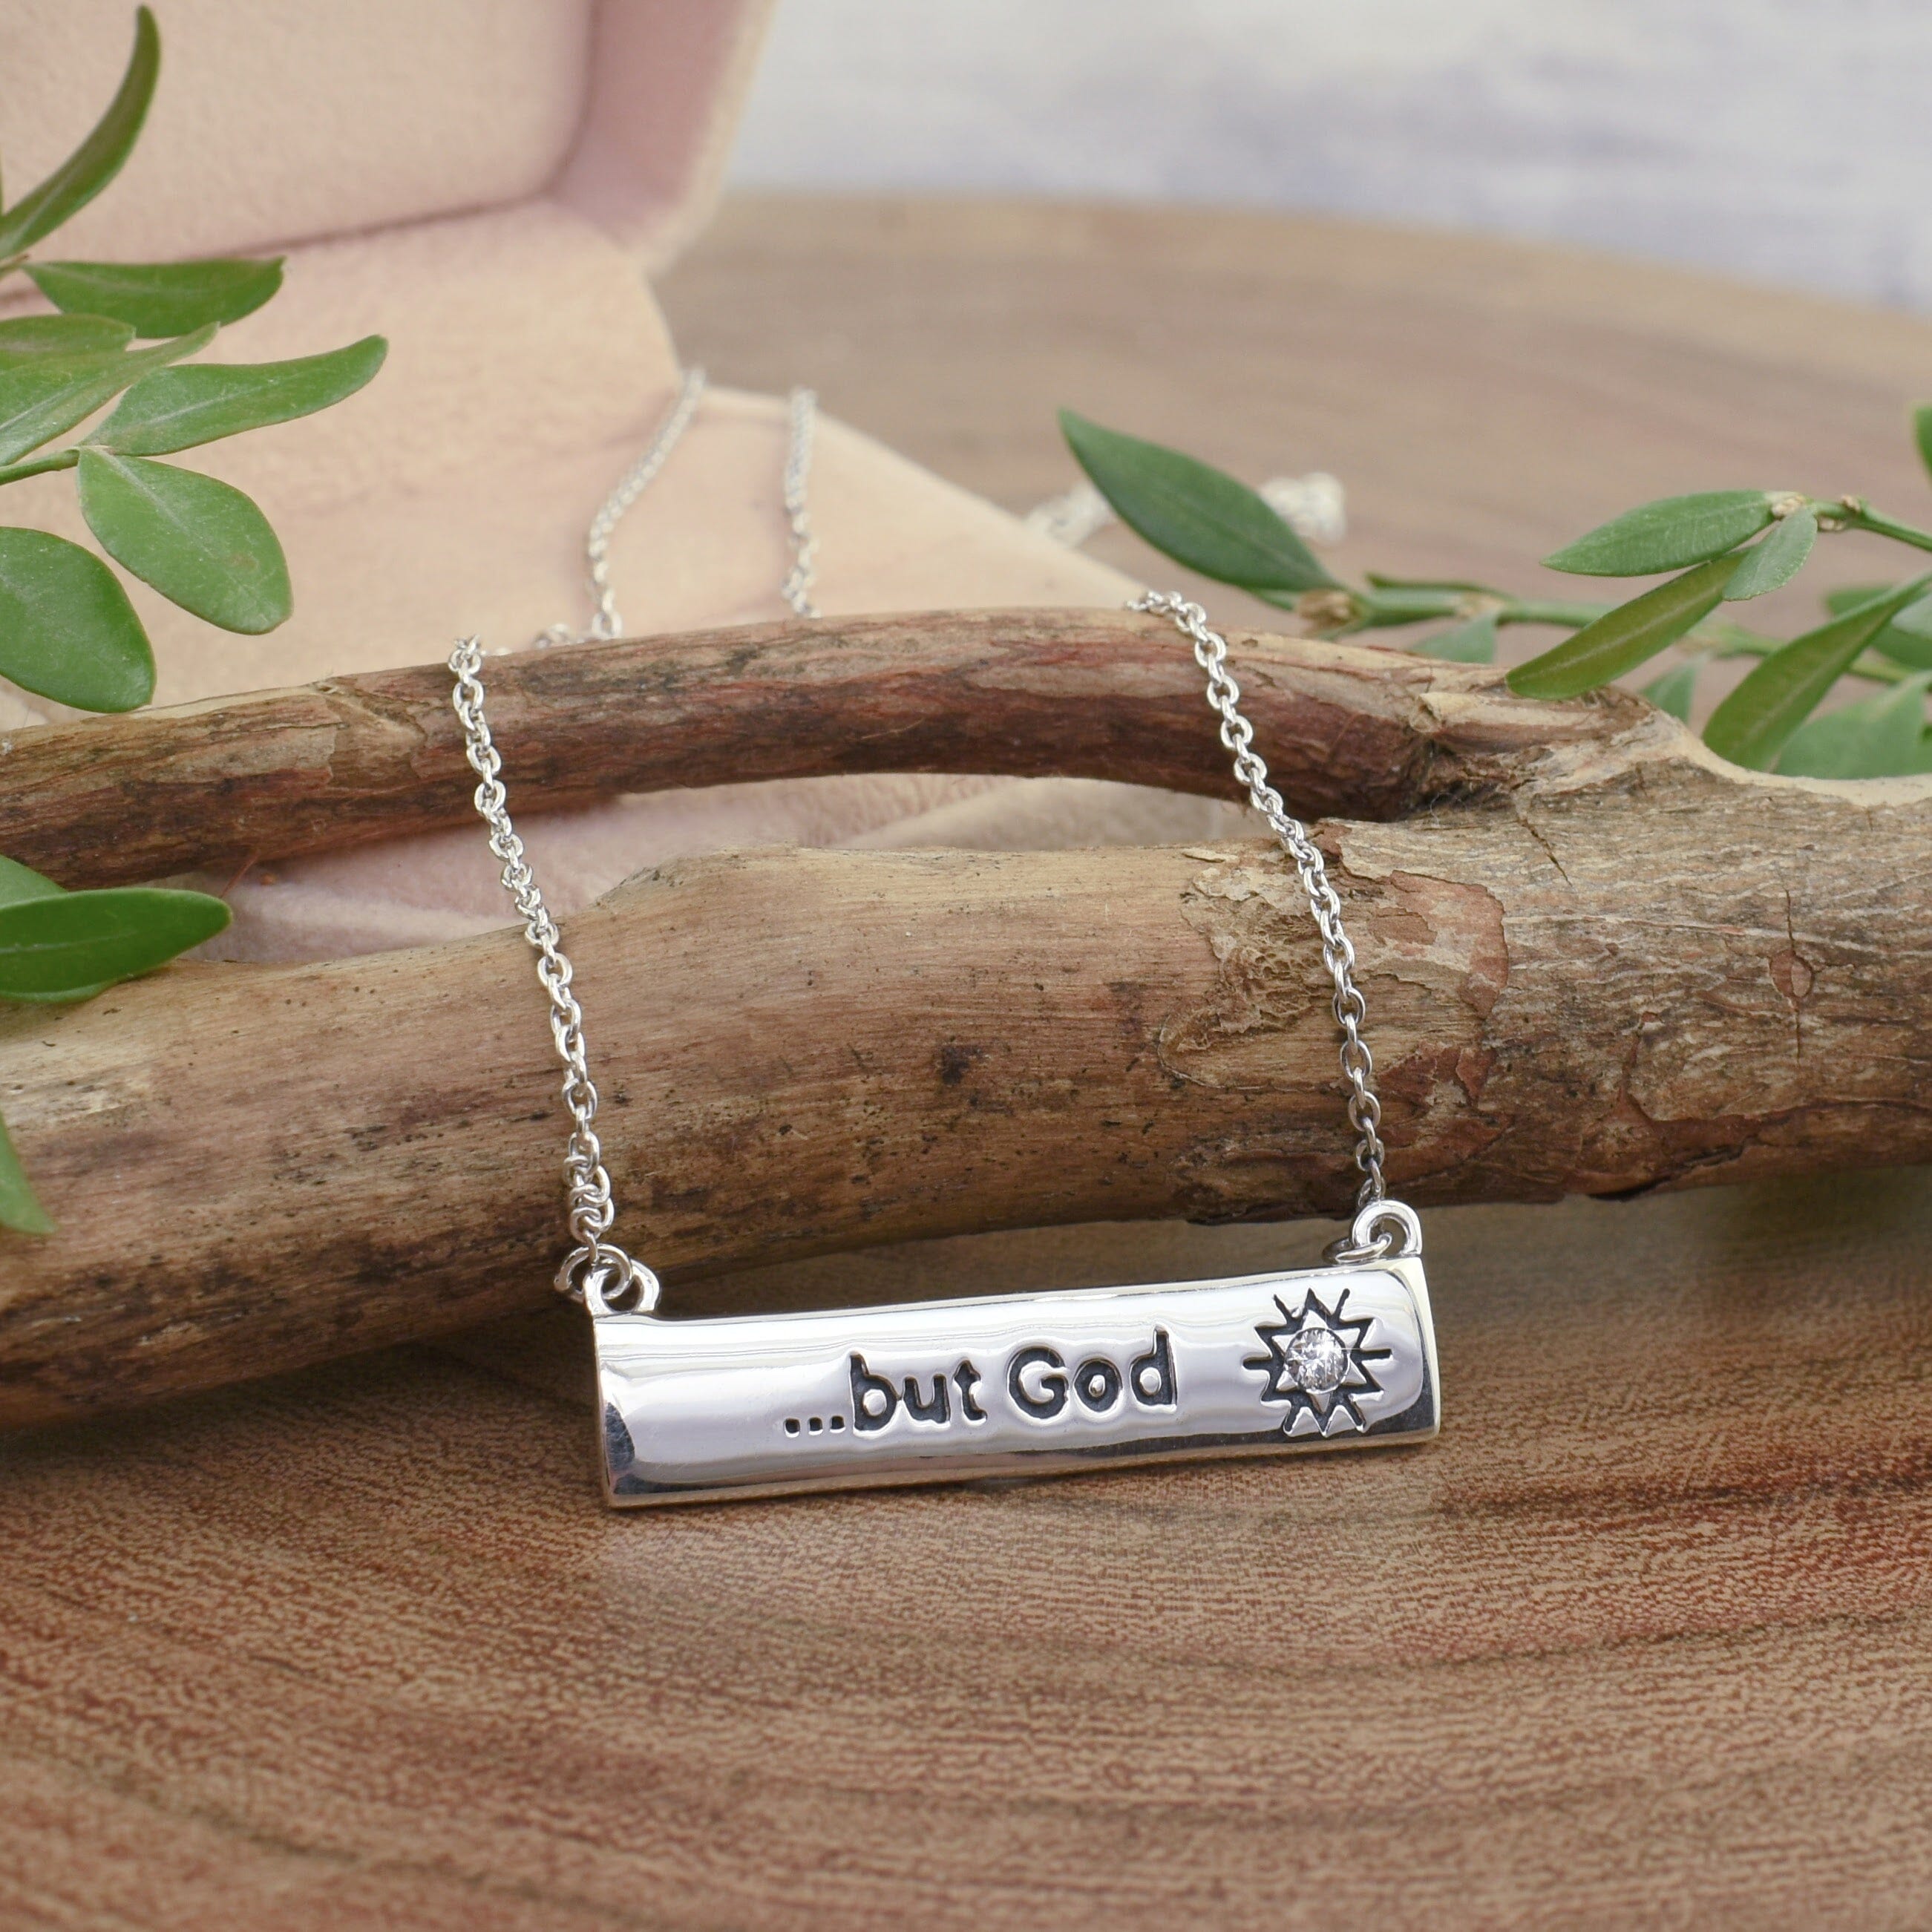 dainty .925 sterling silver bar necklace featuring a tiny diamond